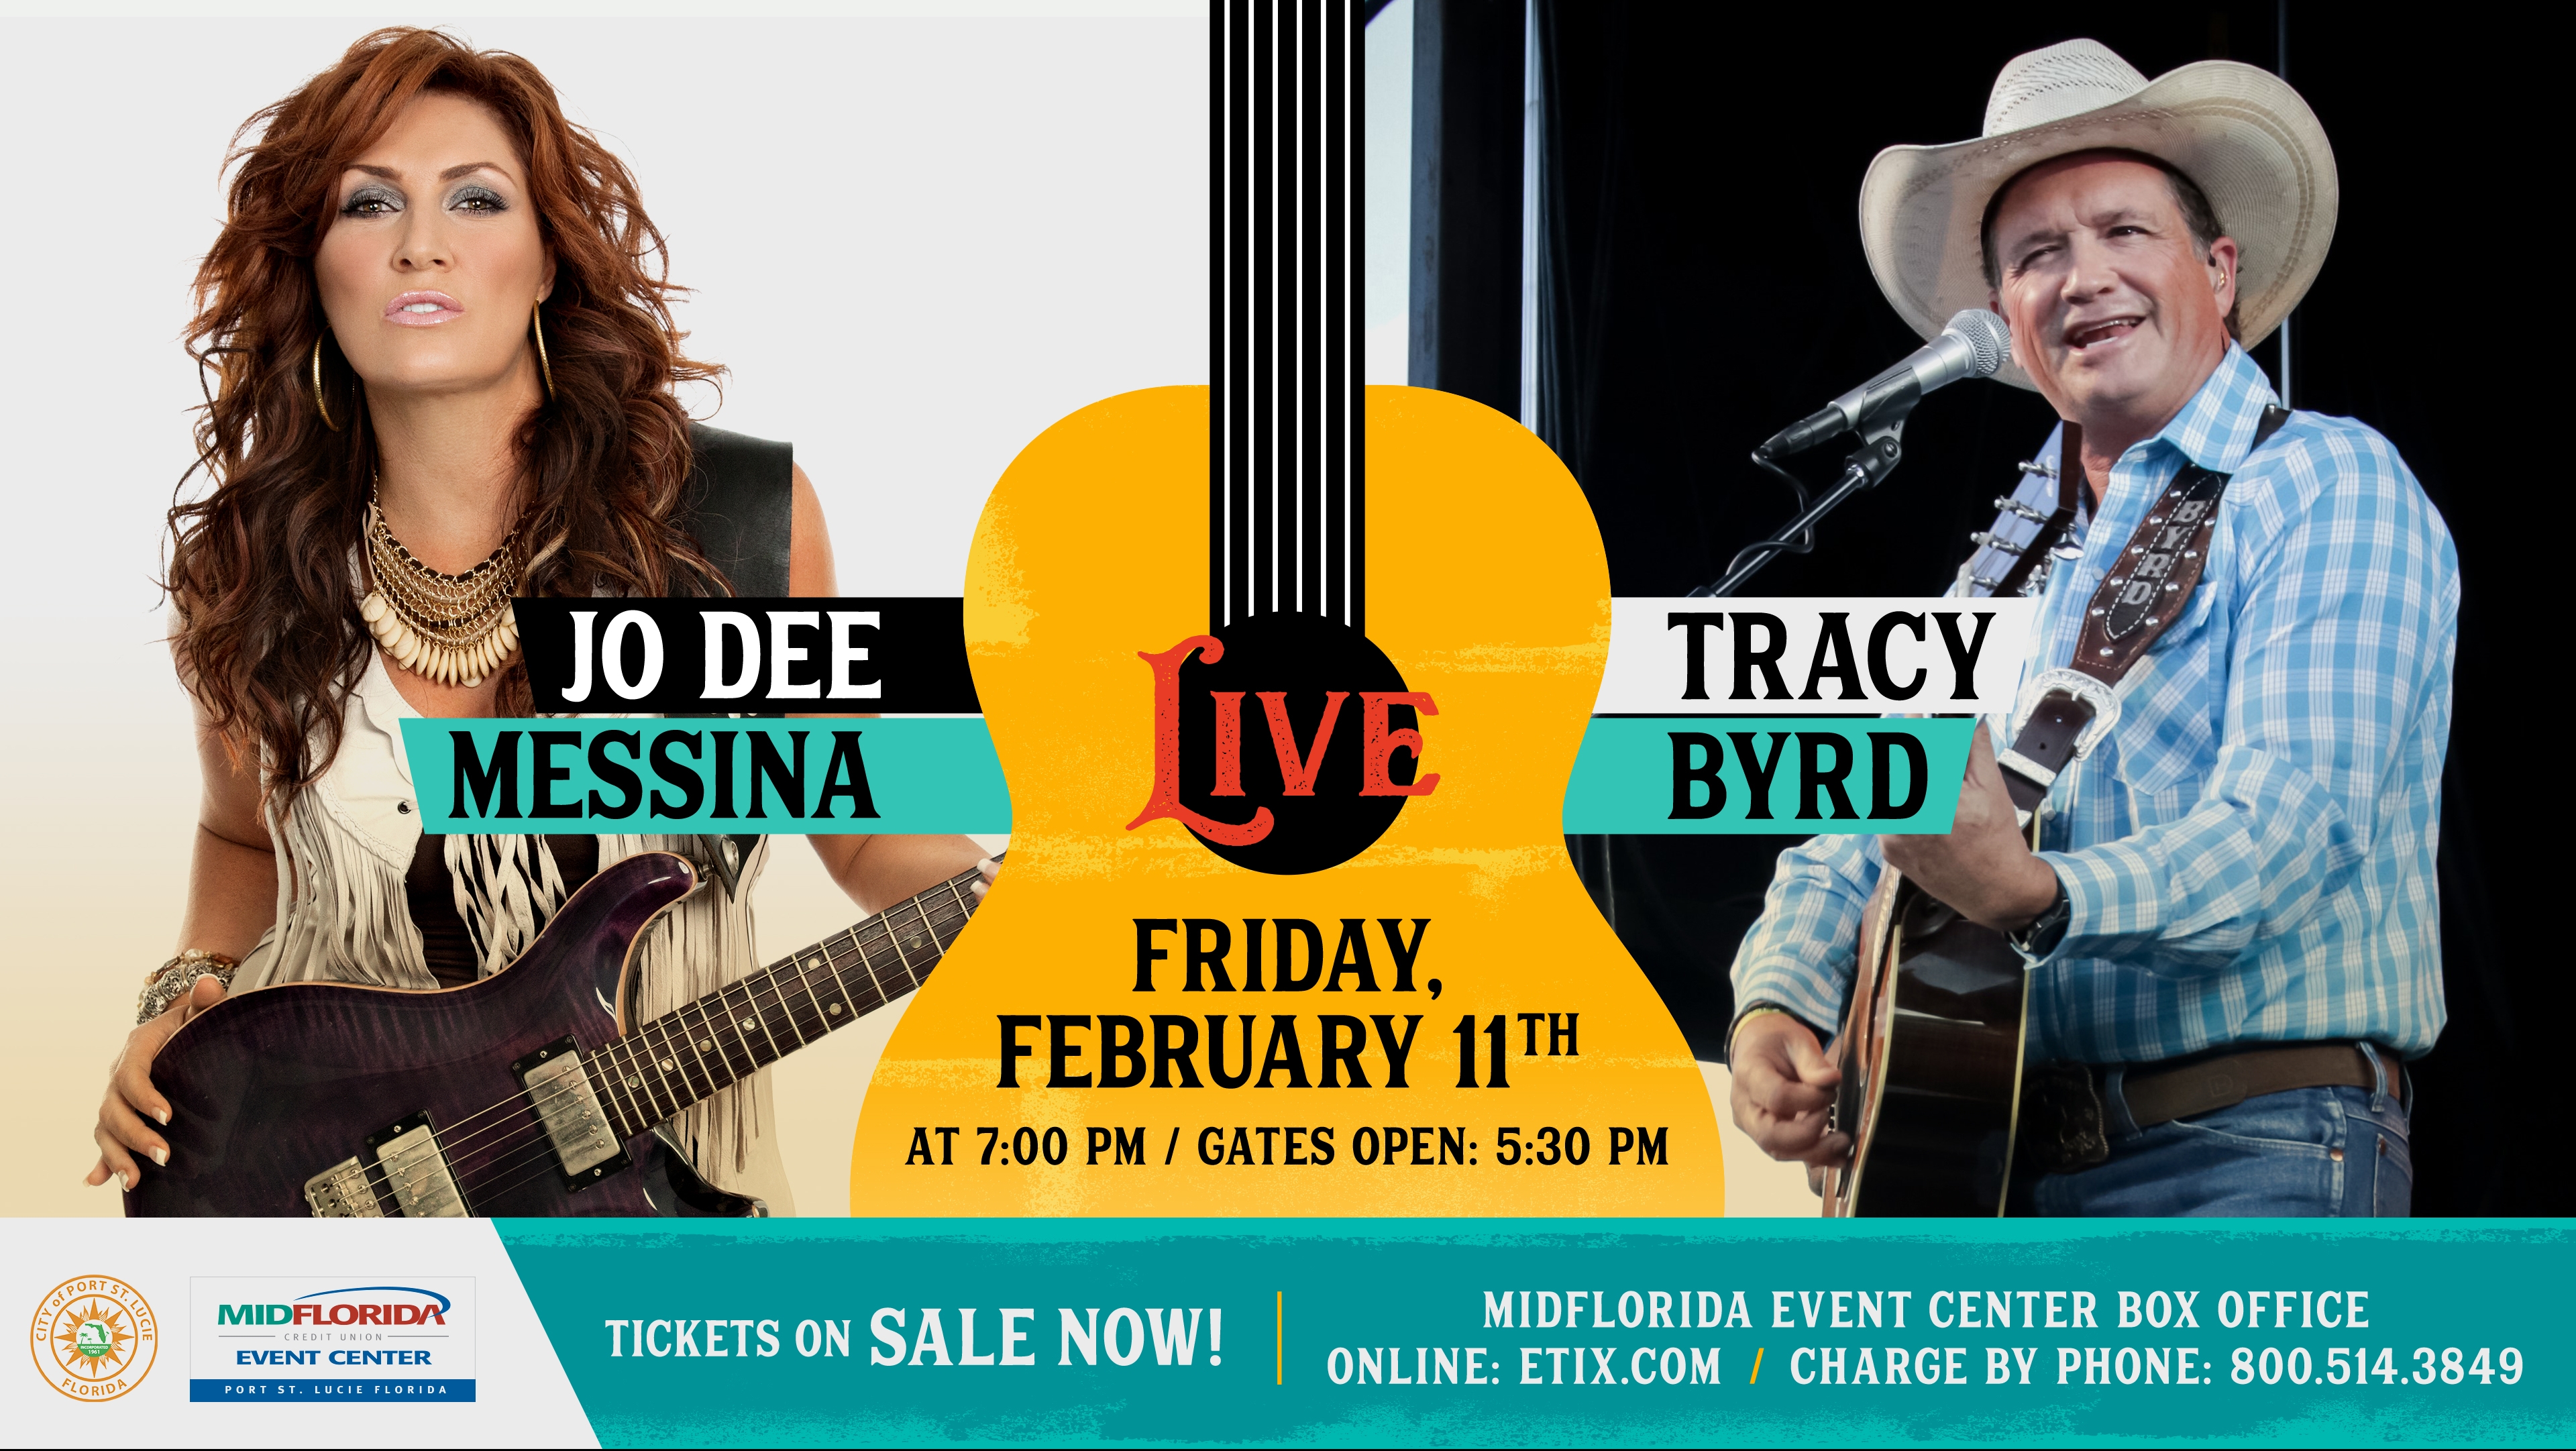 Jo Dee Messina and Tracy Byrd are coming to the MIDFLORIDA Event Center!